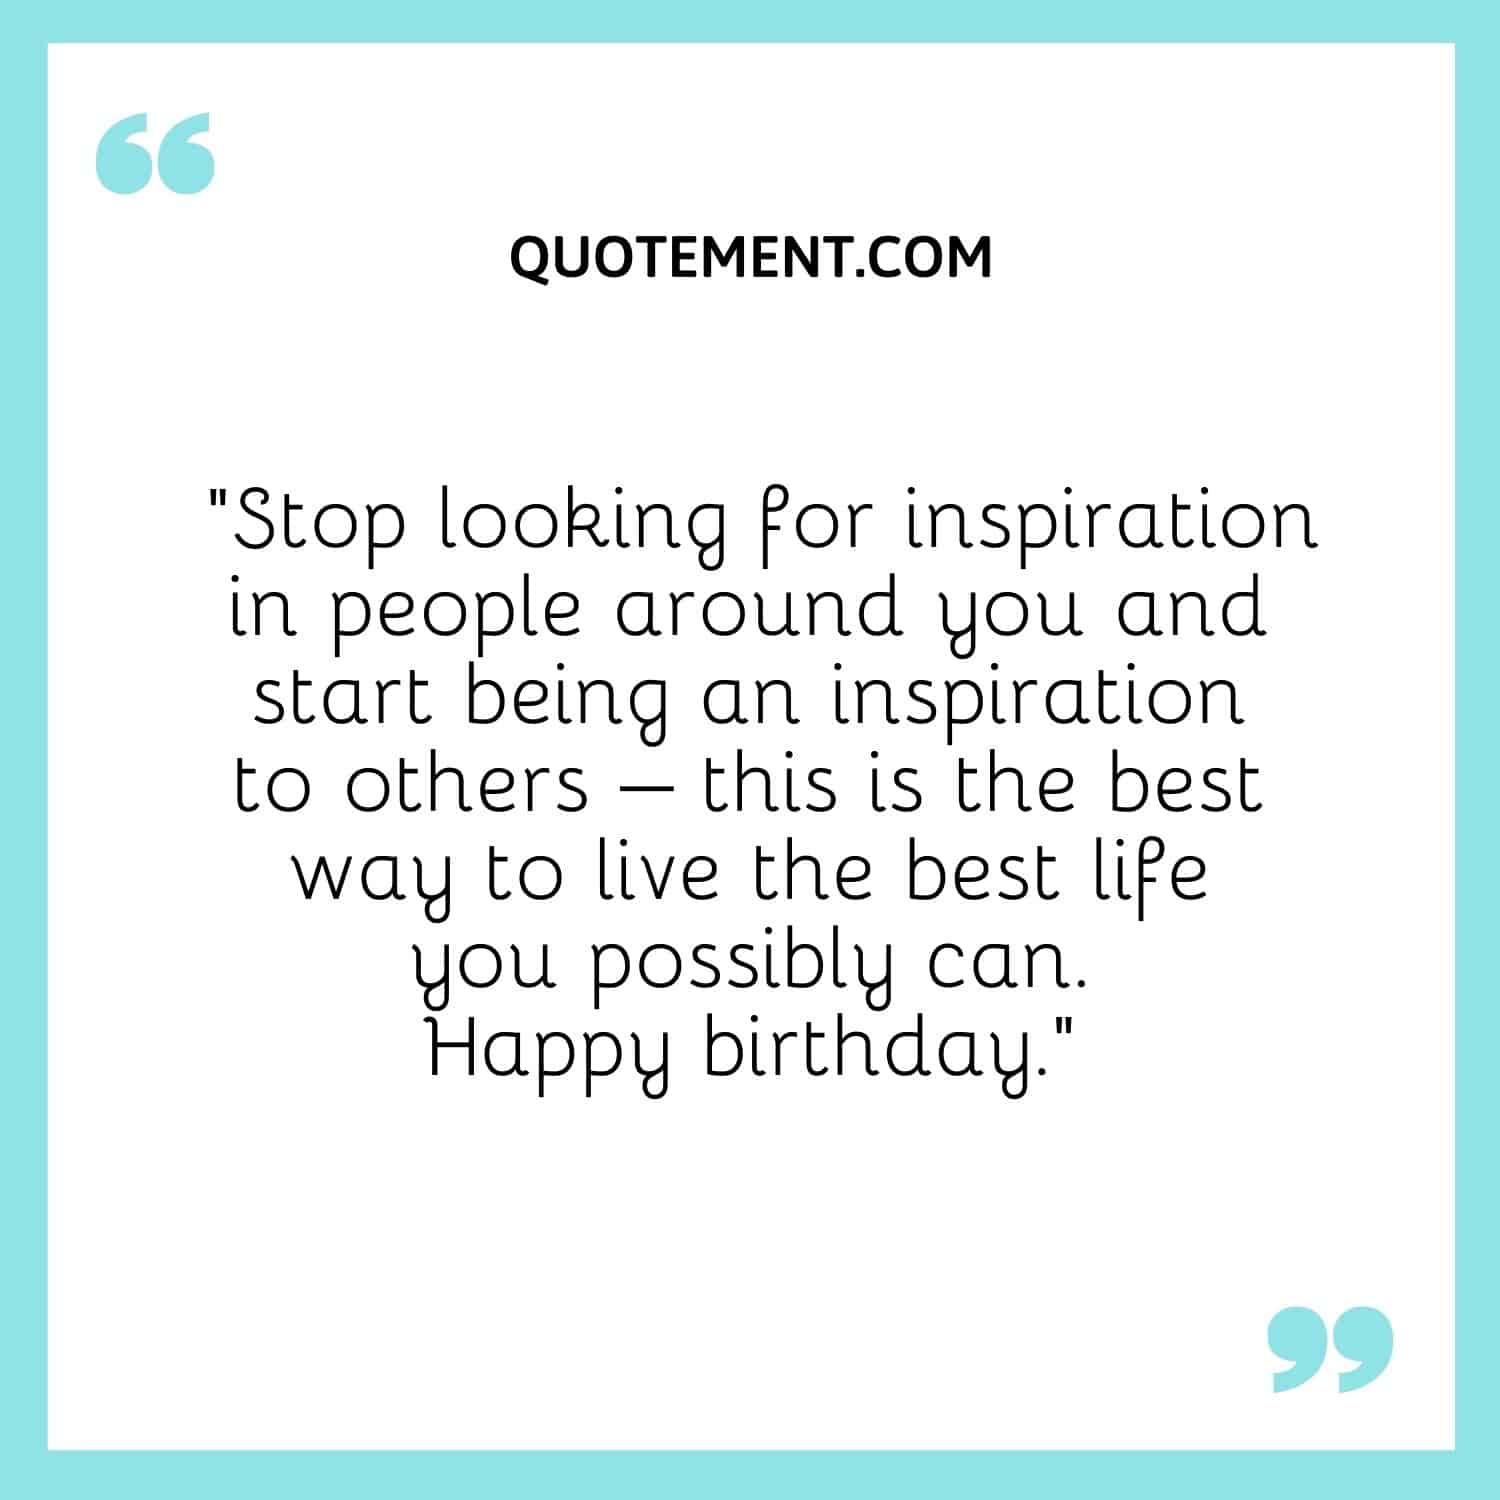 Stop looking for inspiration in people around you and start being an inspiration to others